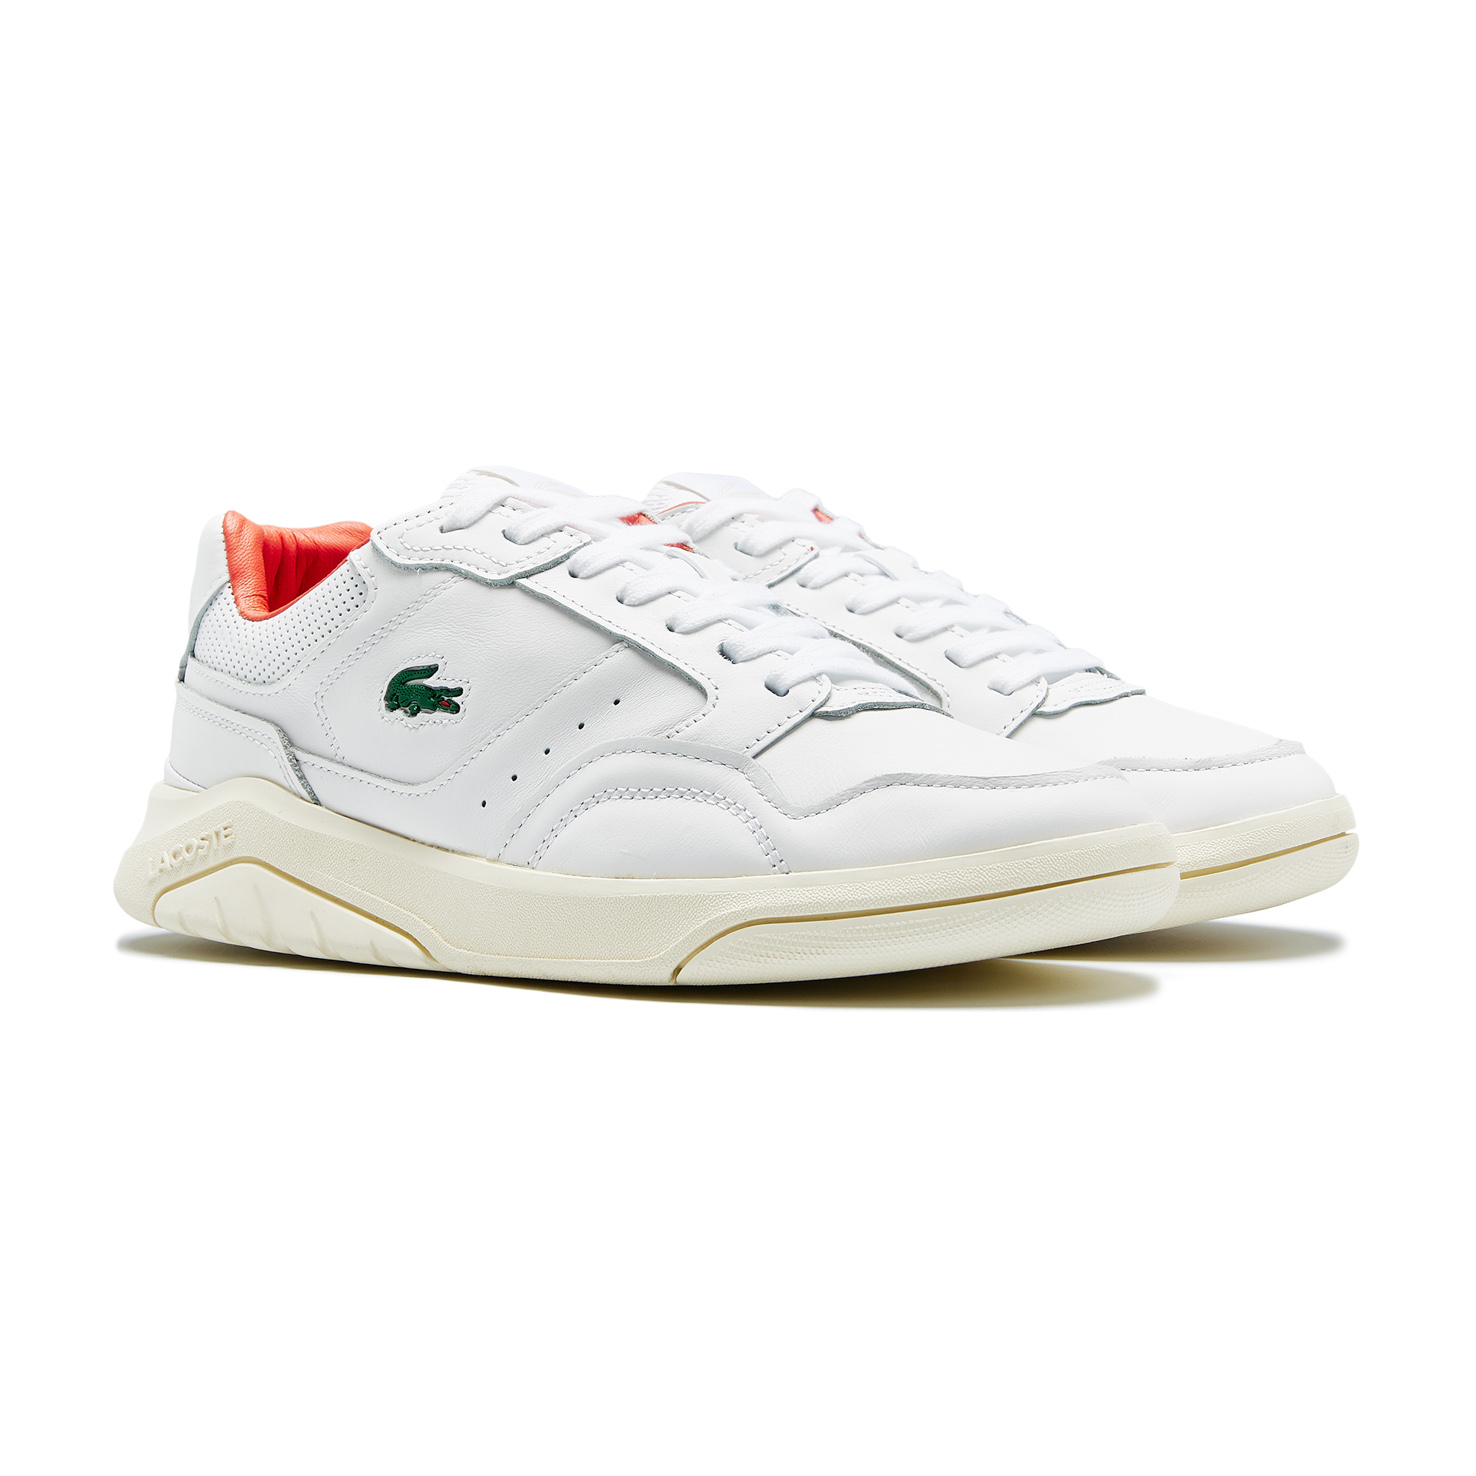 GAME ADVANCE LUXE LACOSTE, размер 36, цвет белый 741SFA0066 - фото 2